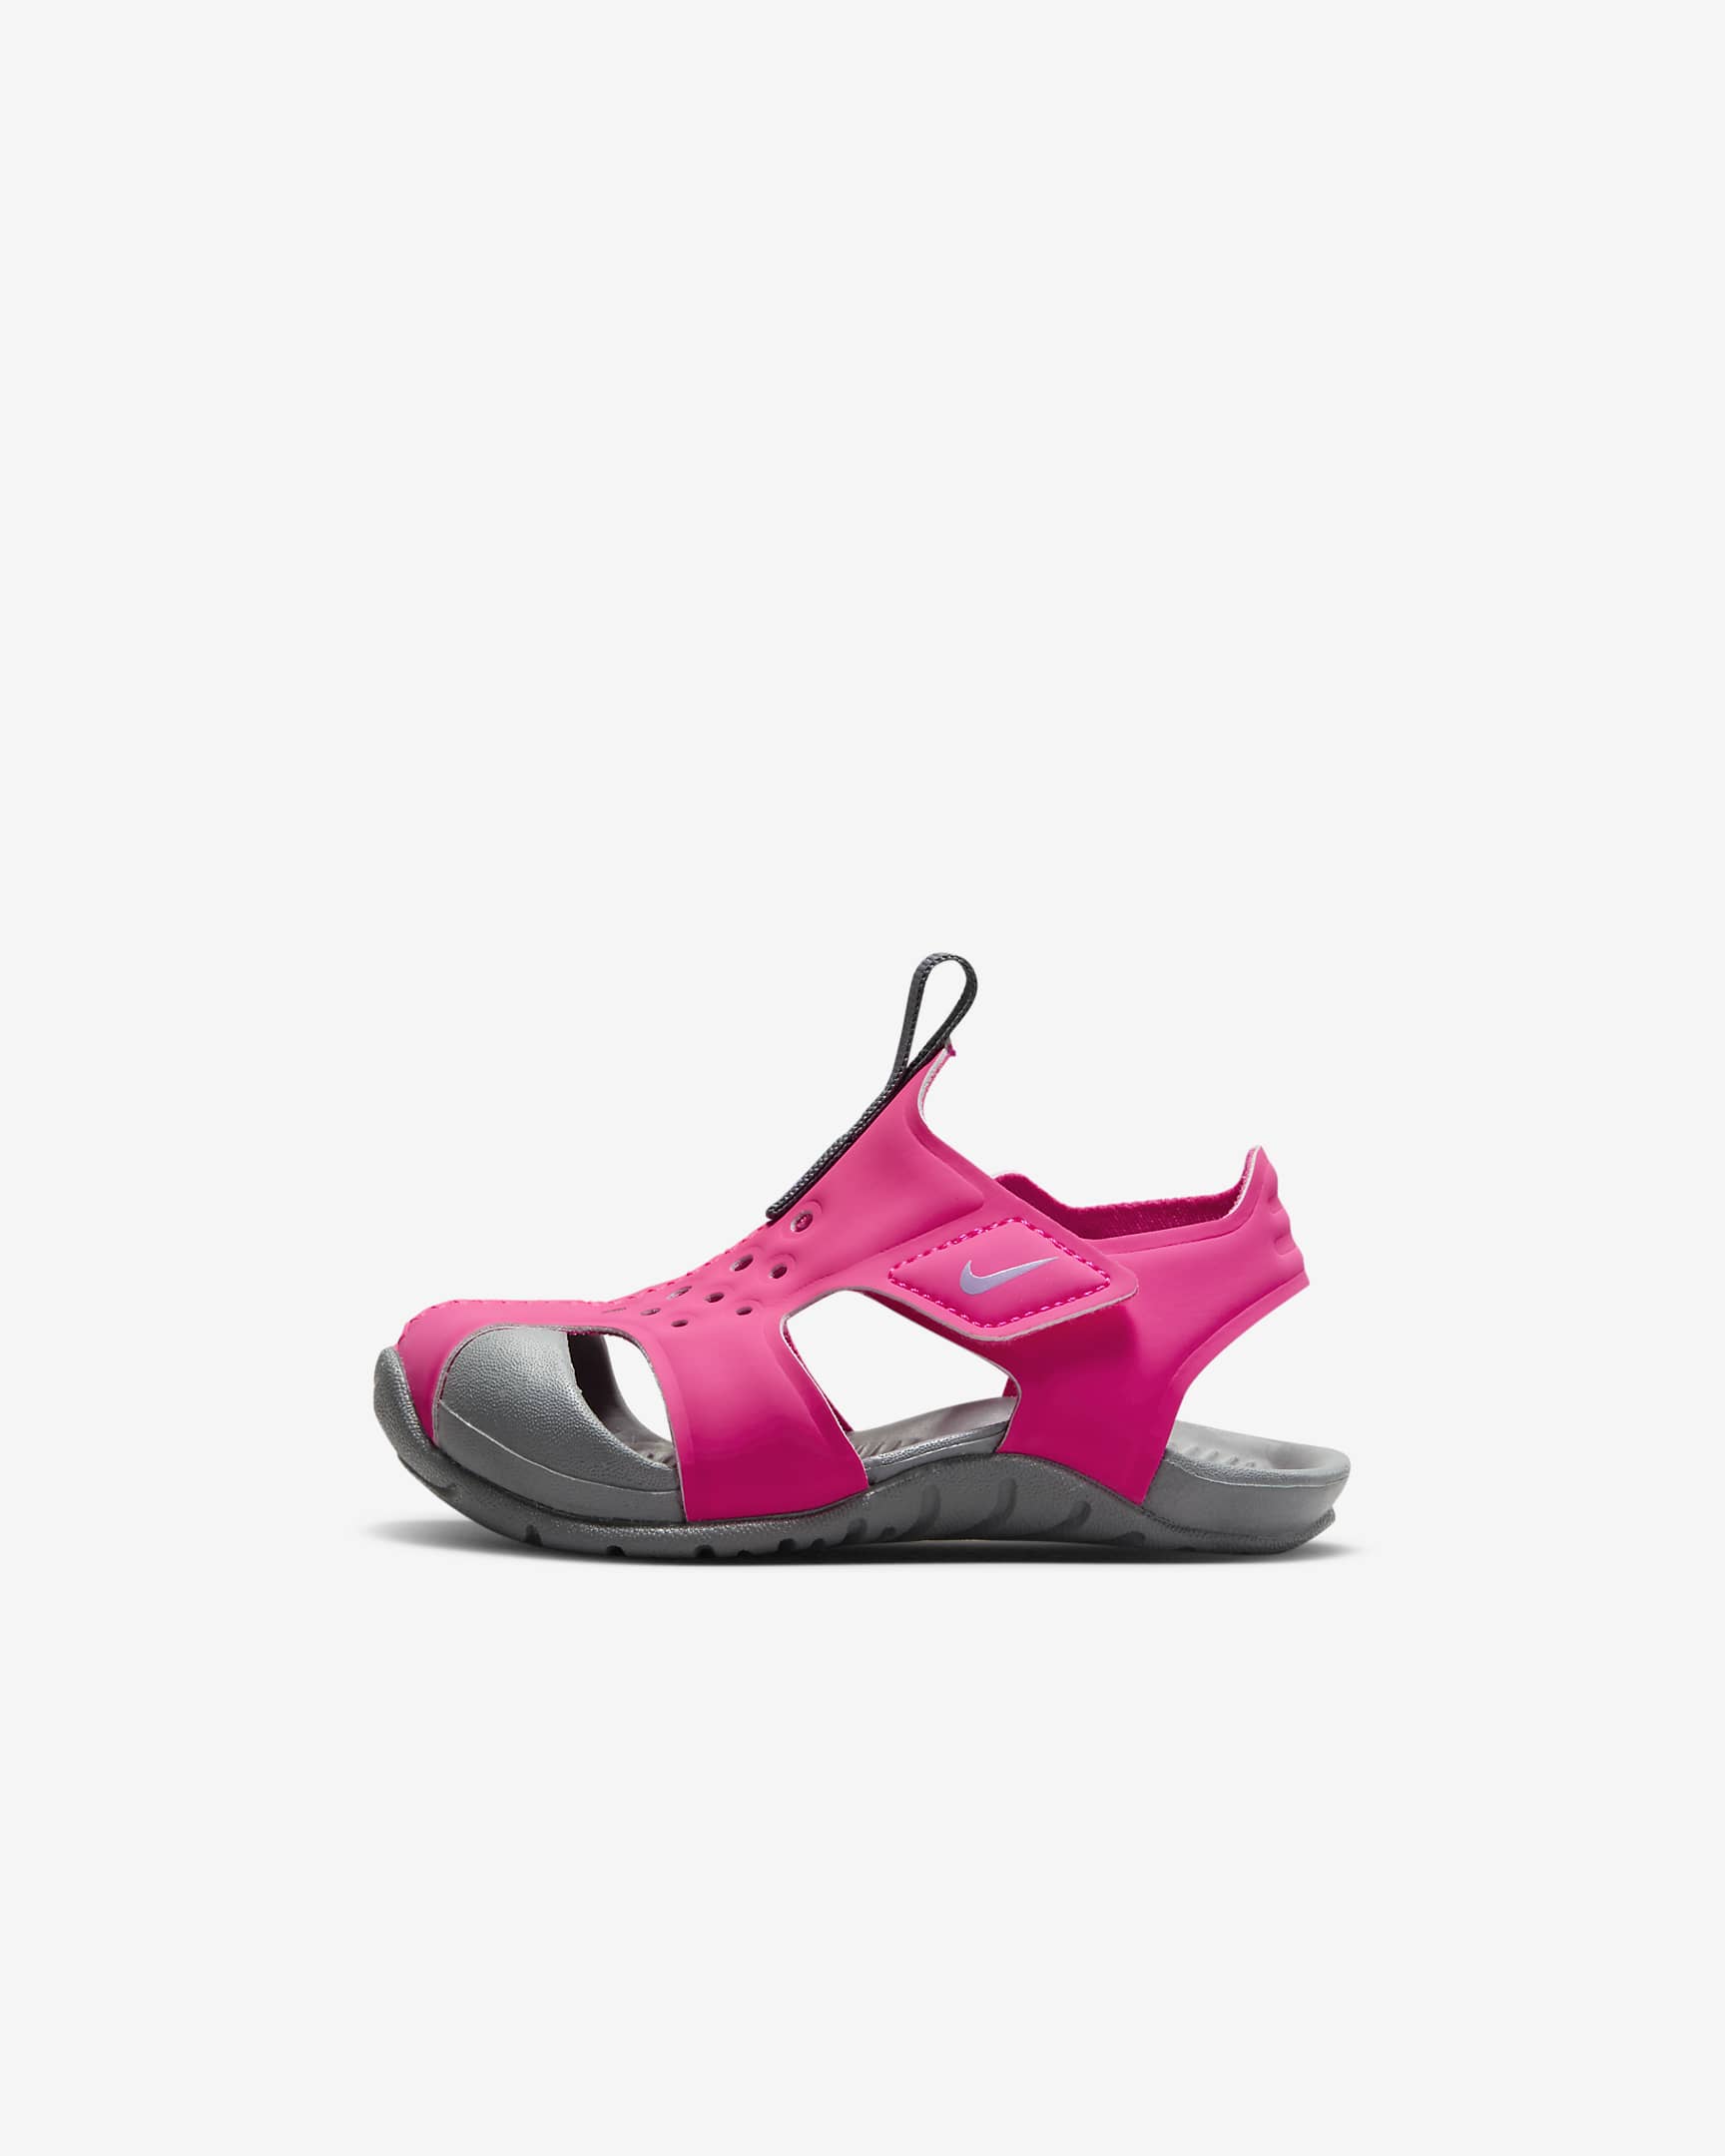 Nike Sunray Protect 2 Baby/Toddler Sandals. Nike.com